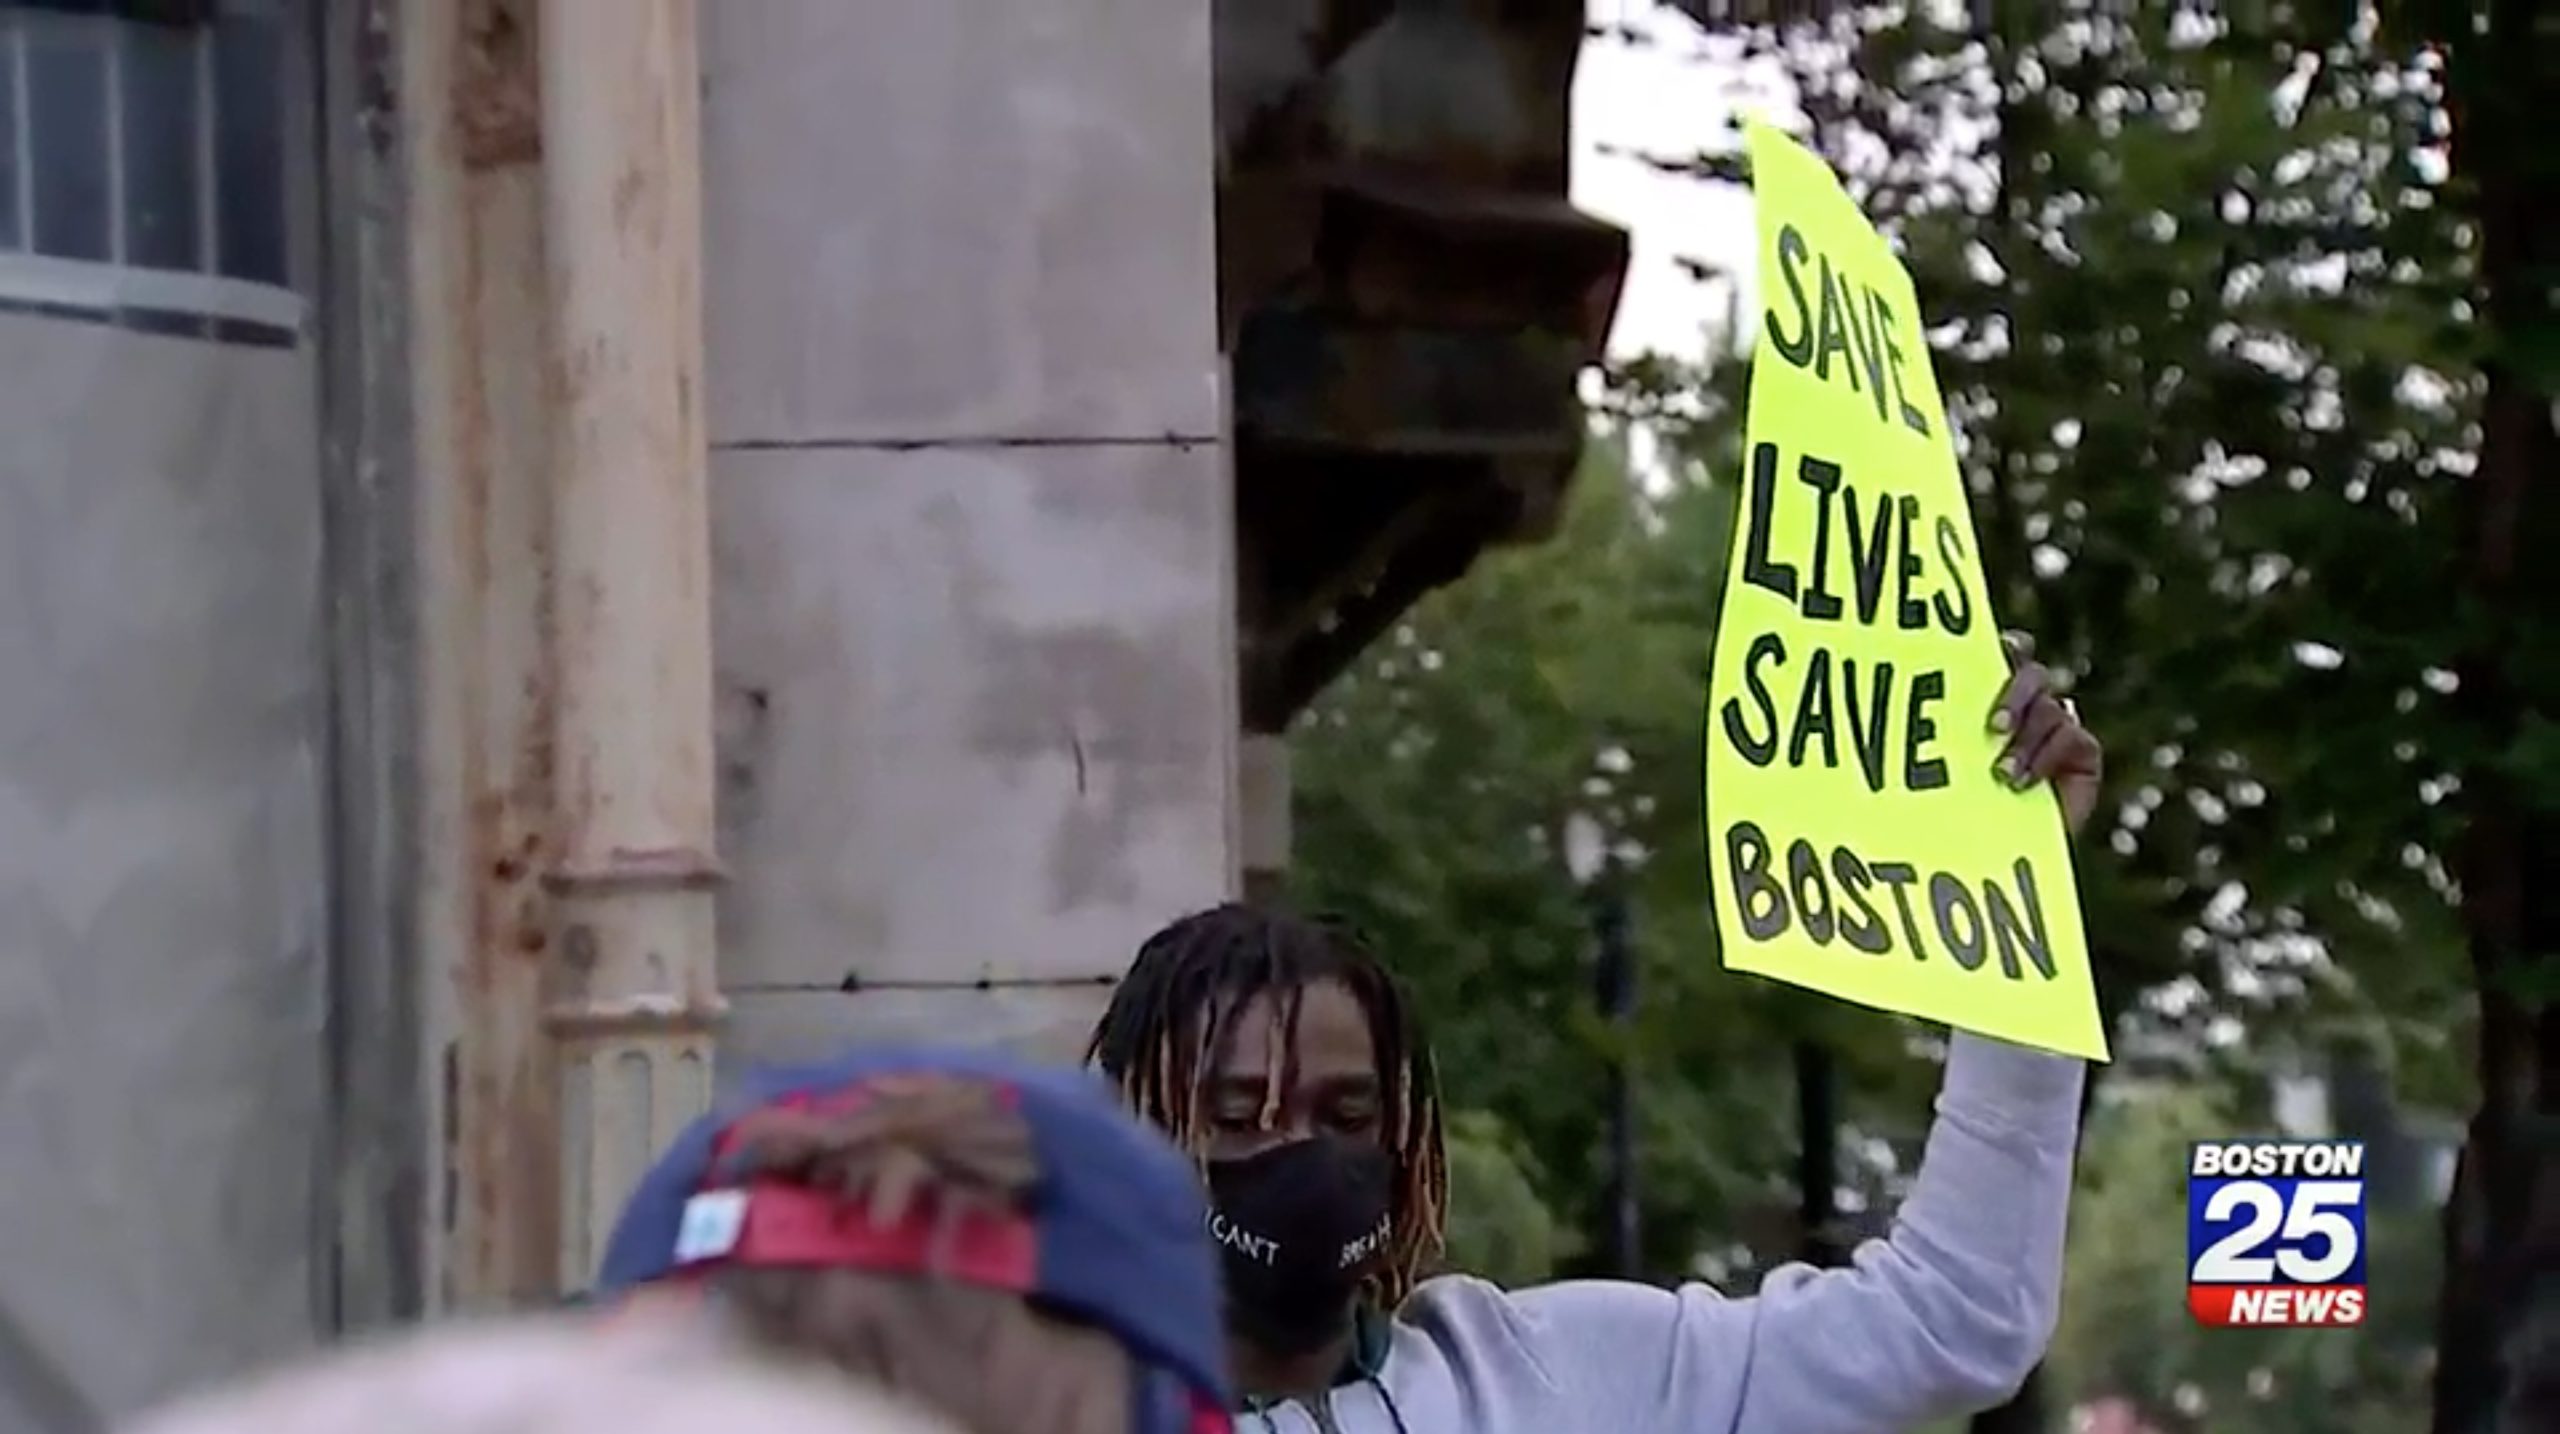 A demonstrator holds a sign that says "Save Lives Save Boston" during a protest against the conditions of "Methadone Mile" in Boston Thursday. (Boston 25 News/Video screenshot)